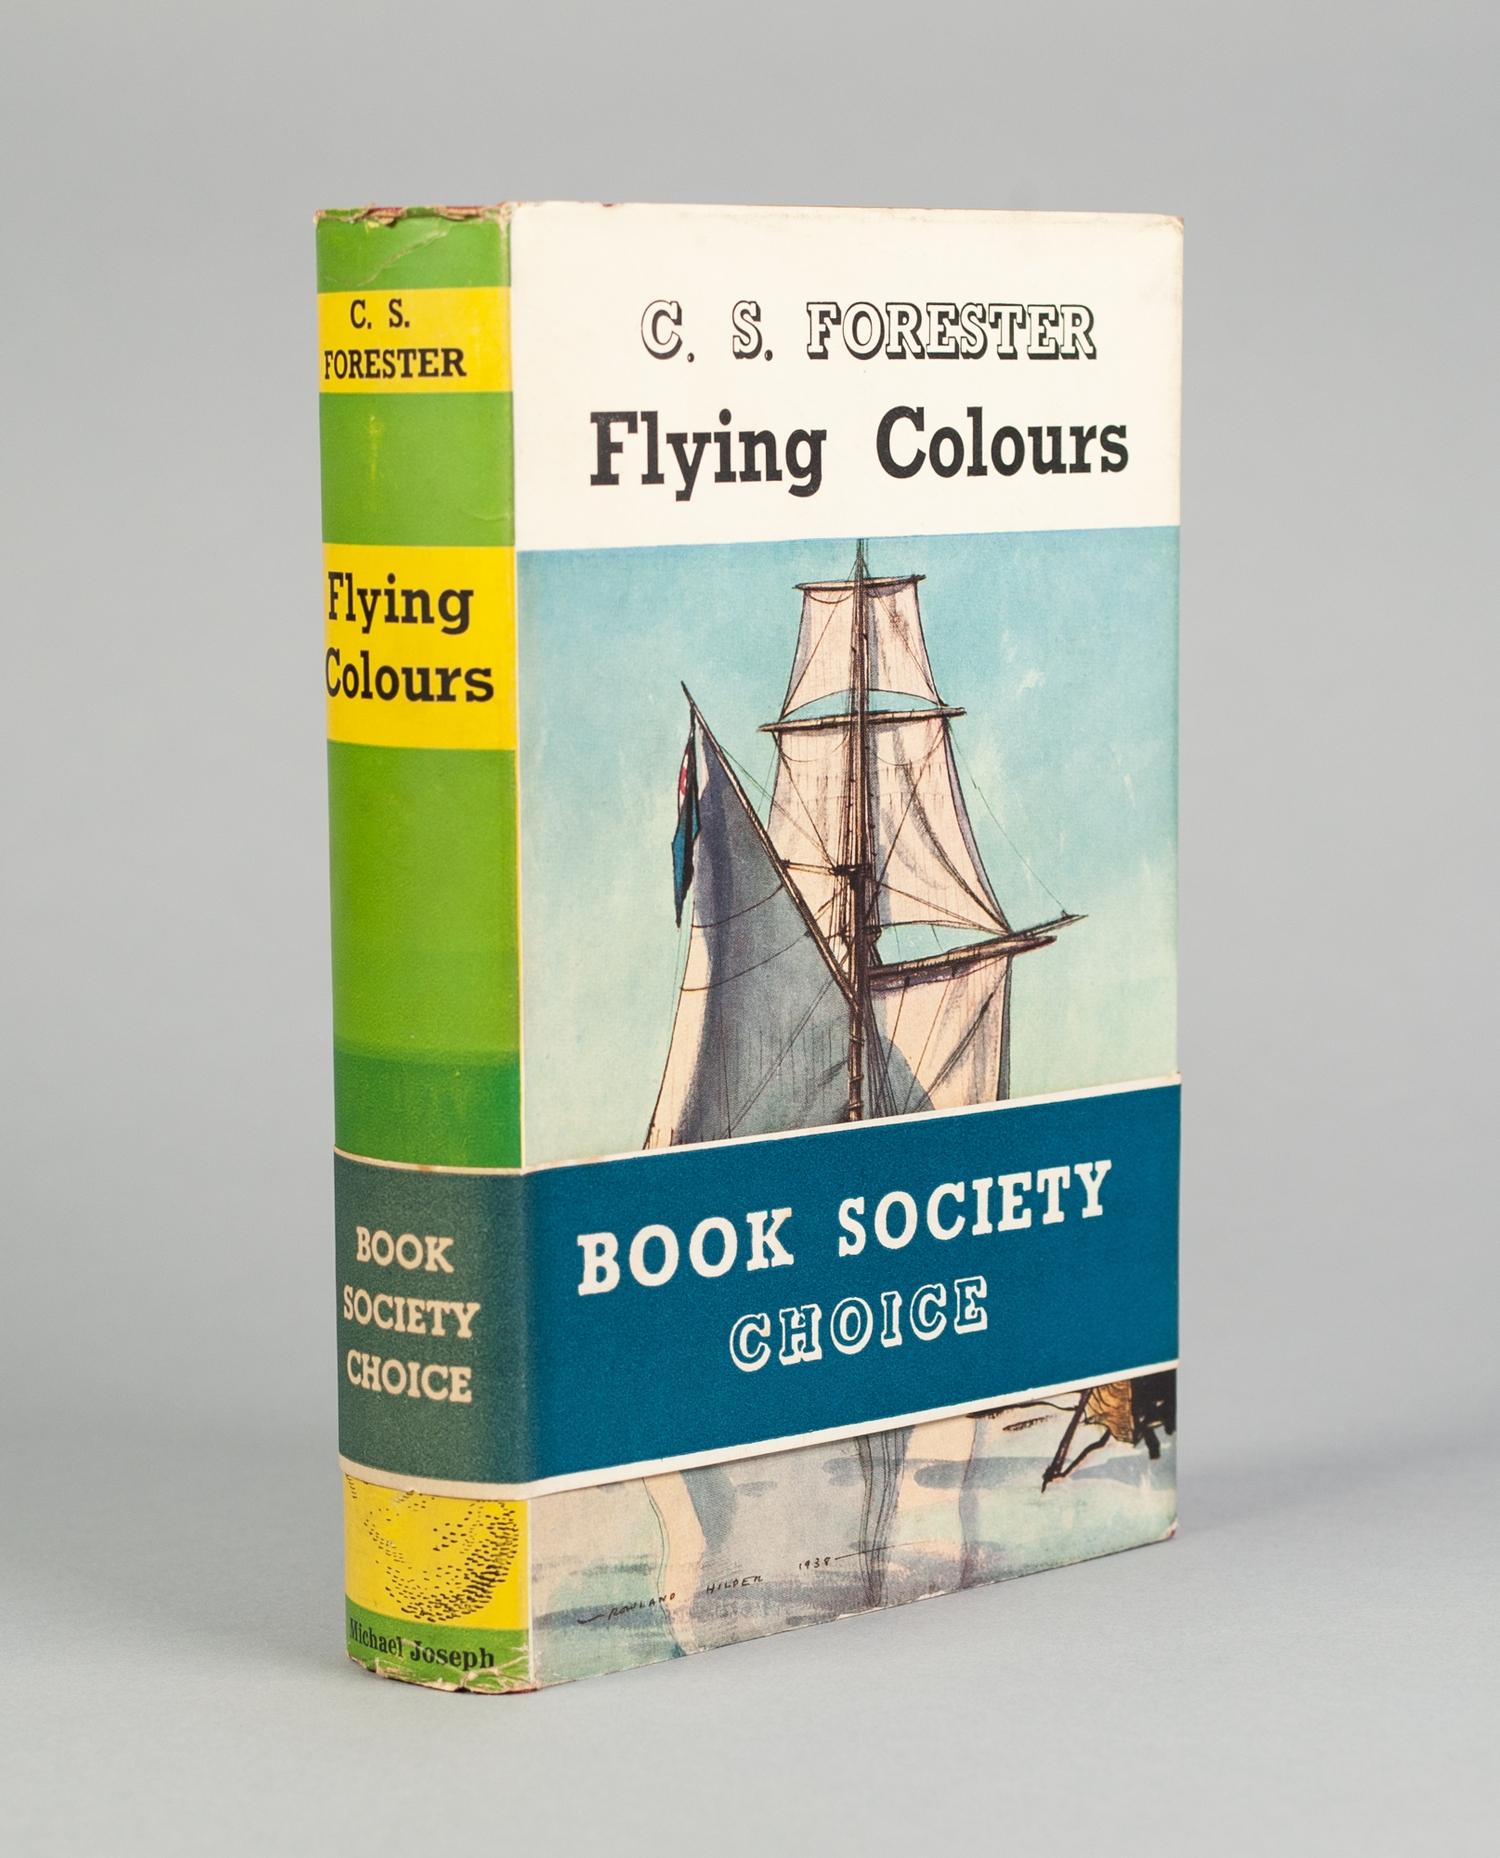 C S FORESTER, FLYING COLOURS 1st EDITION 1938, PUBLISHED BY MICHAEL JOSEPH COMPLETE WITH ORIGINAL